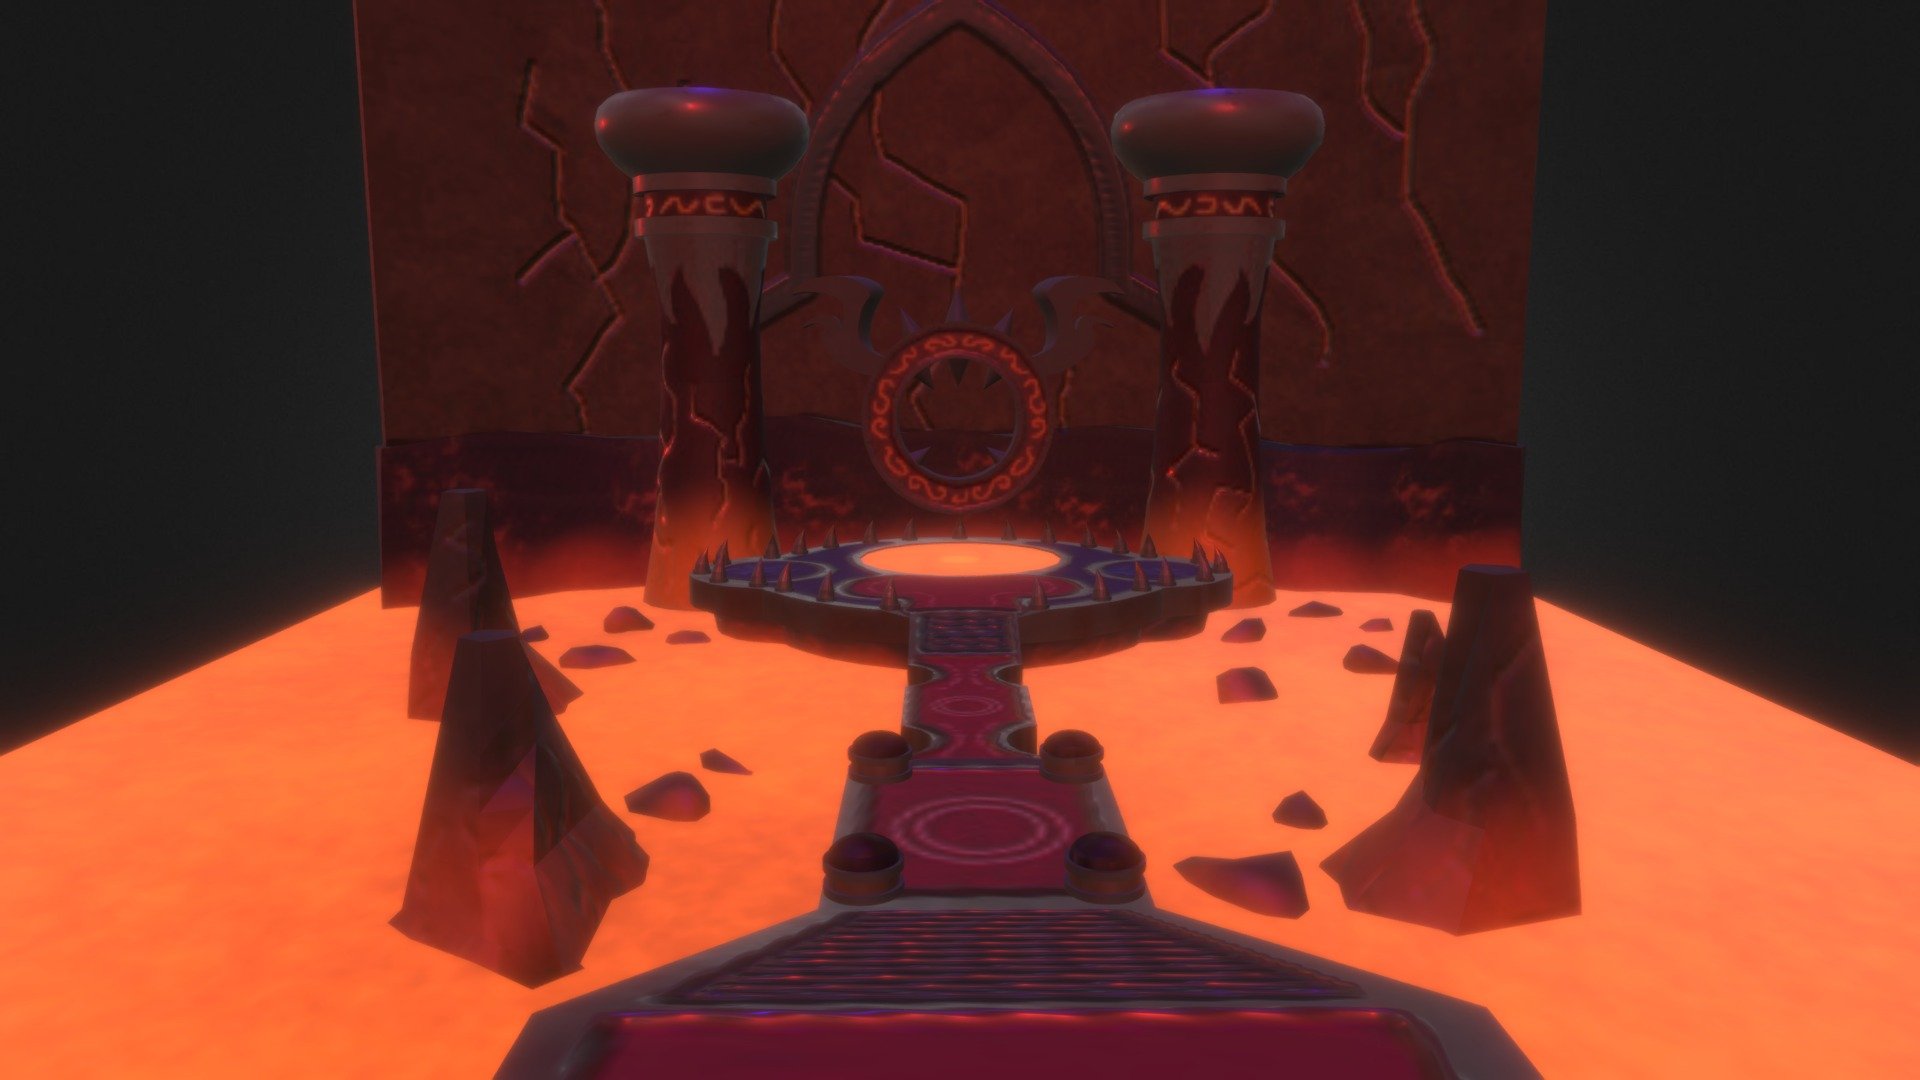 This is my attempt at modelling World of Warcraft's Sulfuron Keep from the Firelands raid.
This model was created for a college project so any feedback would be greatly appreciated!

And just as a side note: I am aware that the underside of the model and the fact that the platform is poking out from the lava does look rather unusual, however the main reason for this is because I wasn't originally planning to upload this scene as a physical model that could be viewed from any perspective, instead, once the model was completed, I intended to take a single, static render of the scene as if it were looking through the eyes of a player, and uploading that image to my Artstation account, meaning that I wasn't really focussing on any of the areas of the model that wouldn't be seen within the final render. Usually fixing this wouldn't be an issue, but because I had already started texturing before making changes to the physical models, I was already unfortunately at the point of no return 3d model